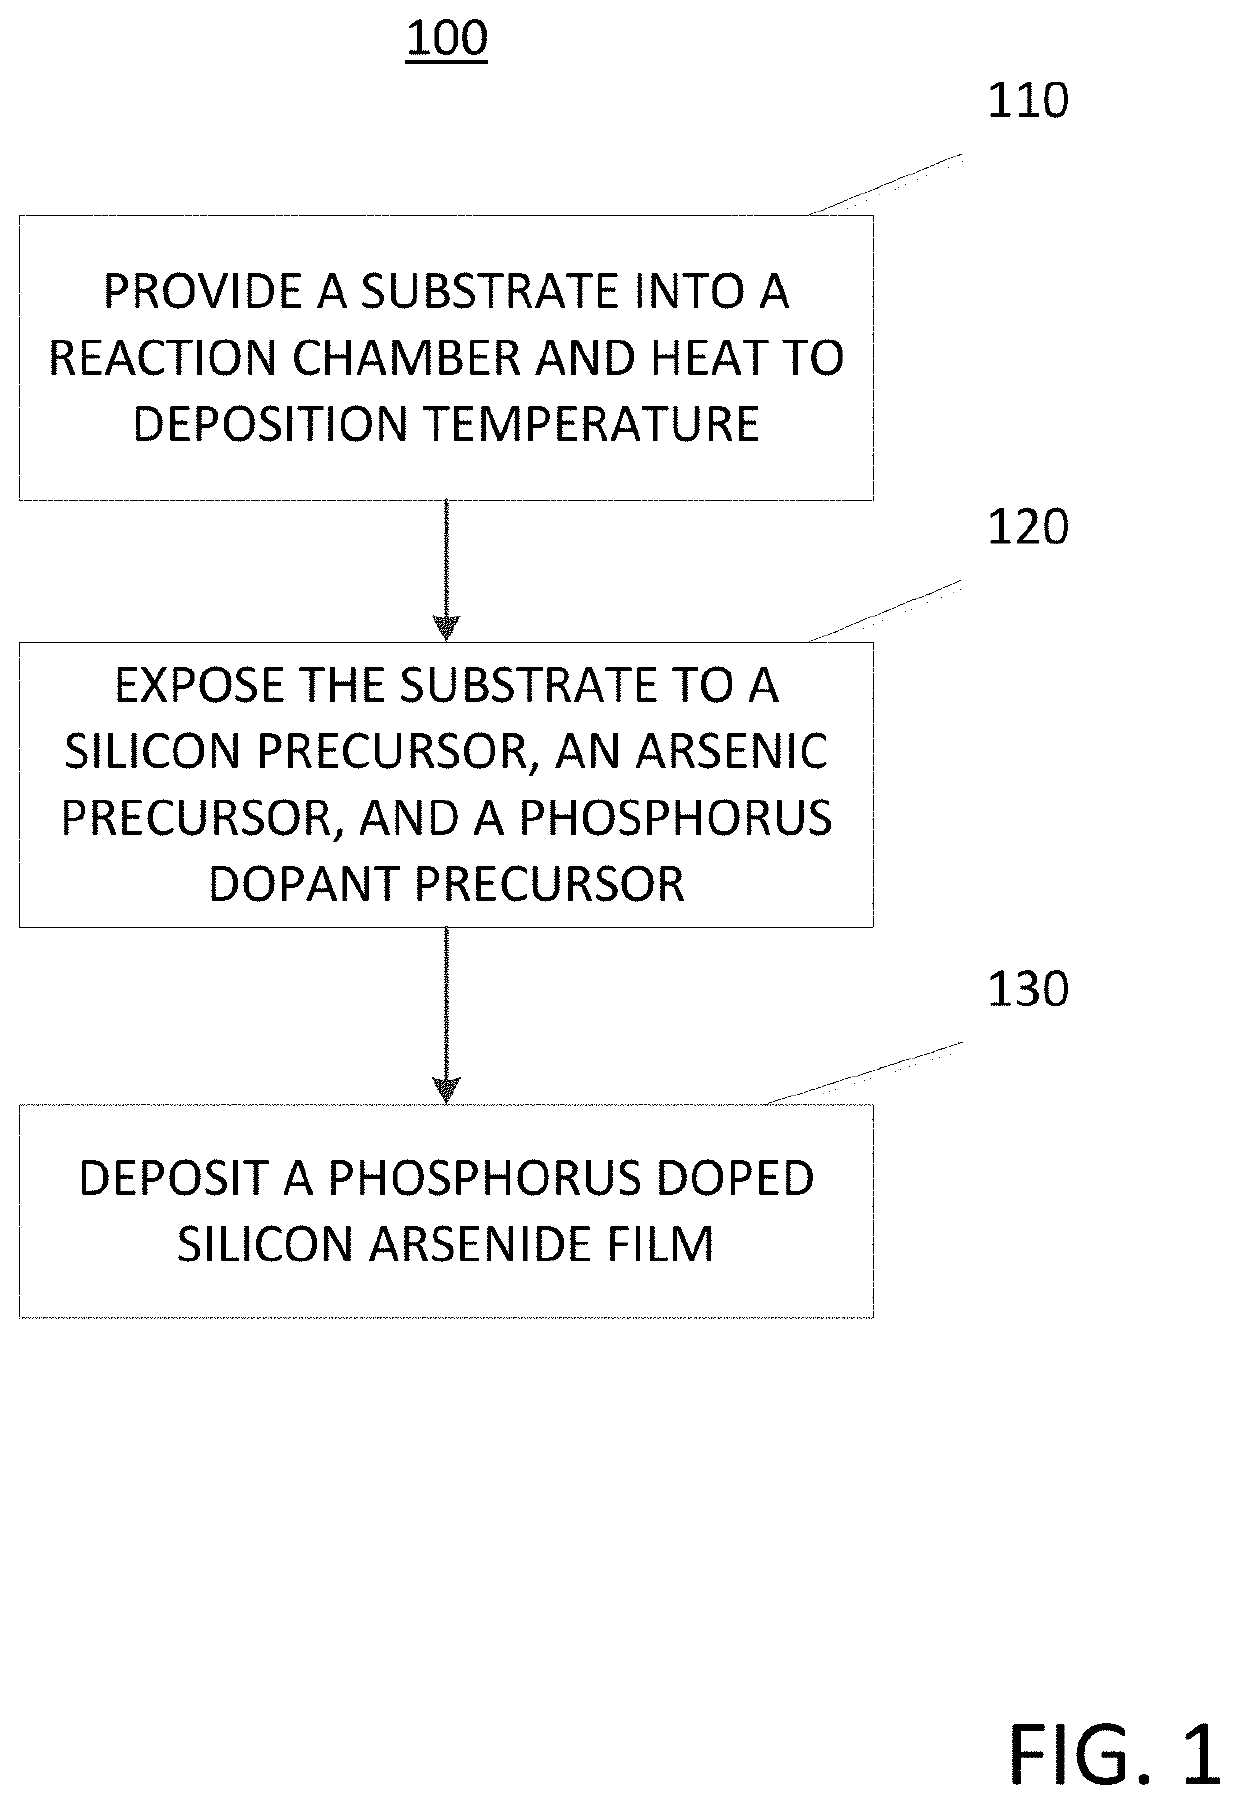 Method for depositing a phosphorus doped silicon arsenide film and related semiconductor device structures